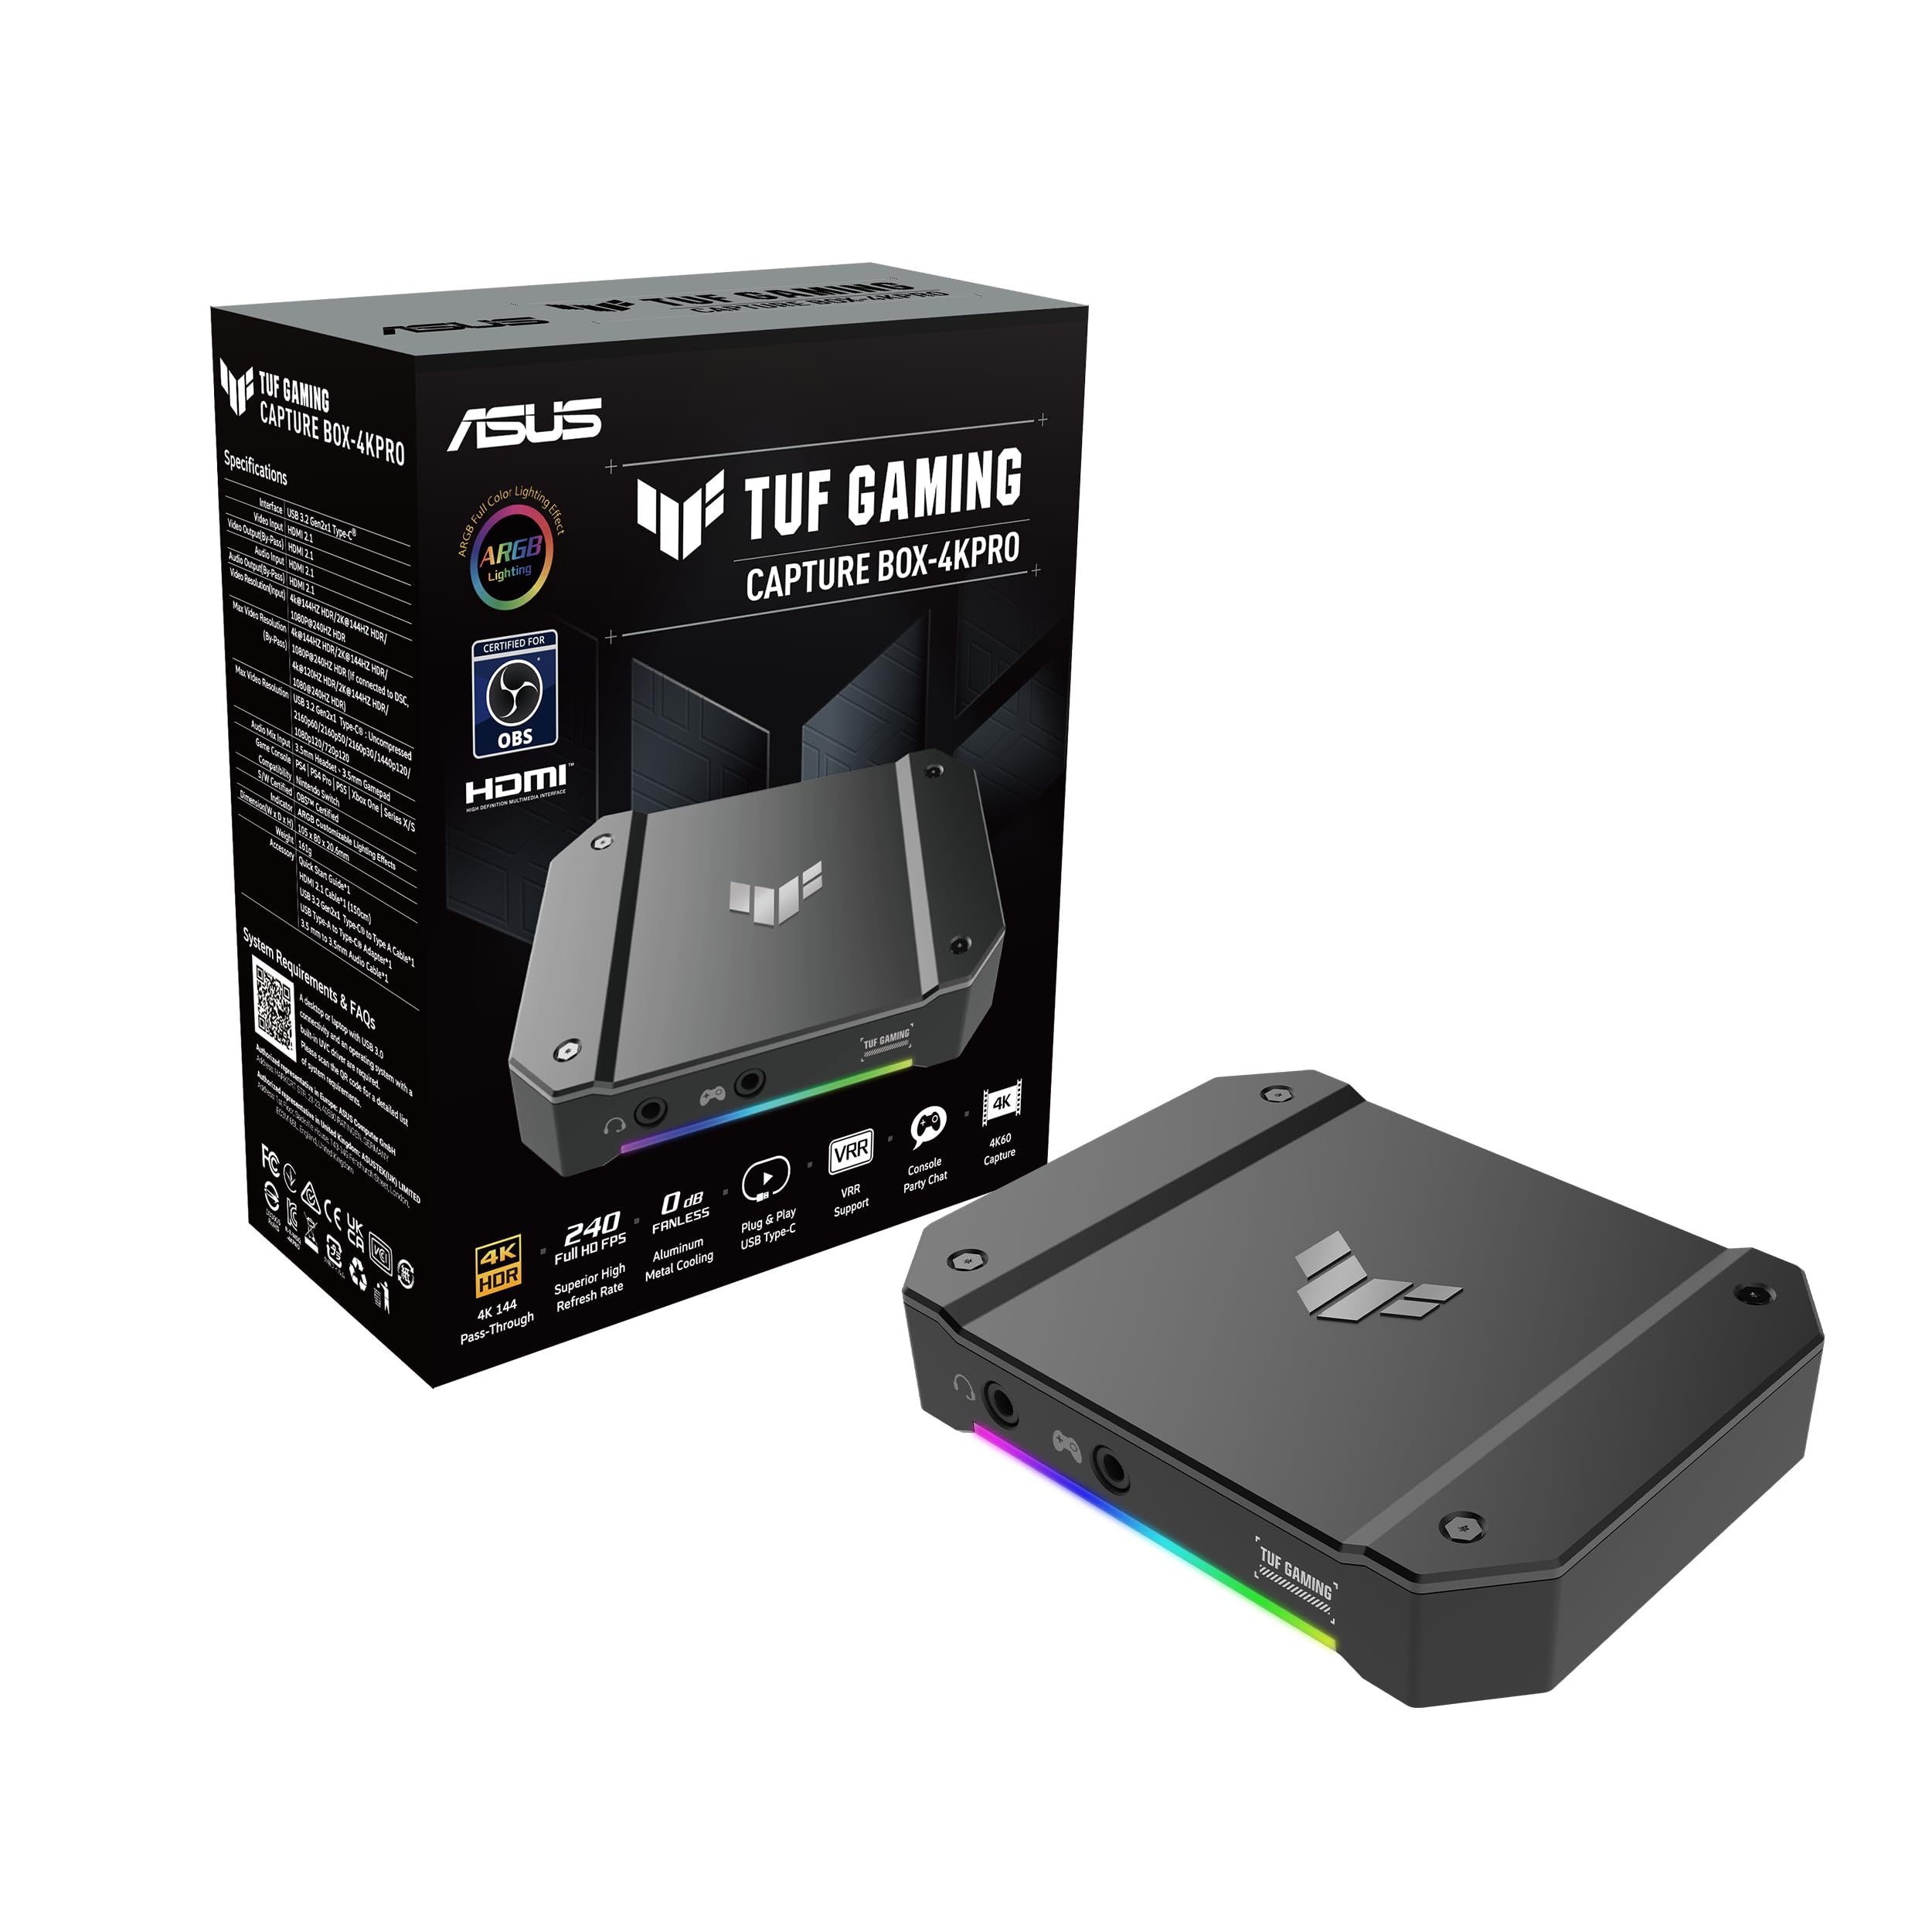 ASUS TUF GAMING CAPTURE BOX-4KPRO (4K144 | 2K144 | Full HD 240 HDR Passthrough, 4K60 | 2K120 | Full HD 120 Capture, USB Type-C 3.2 Gen 2, HDMI 2.1, VRR Supported, On-board Scaling, Certified for OBS™)